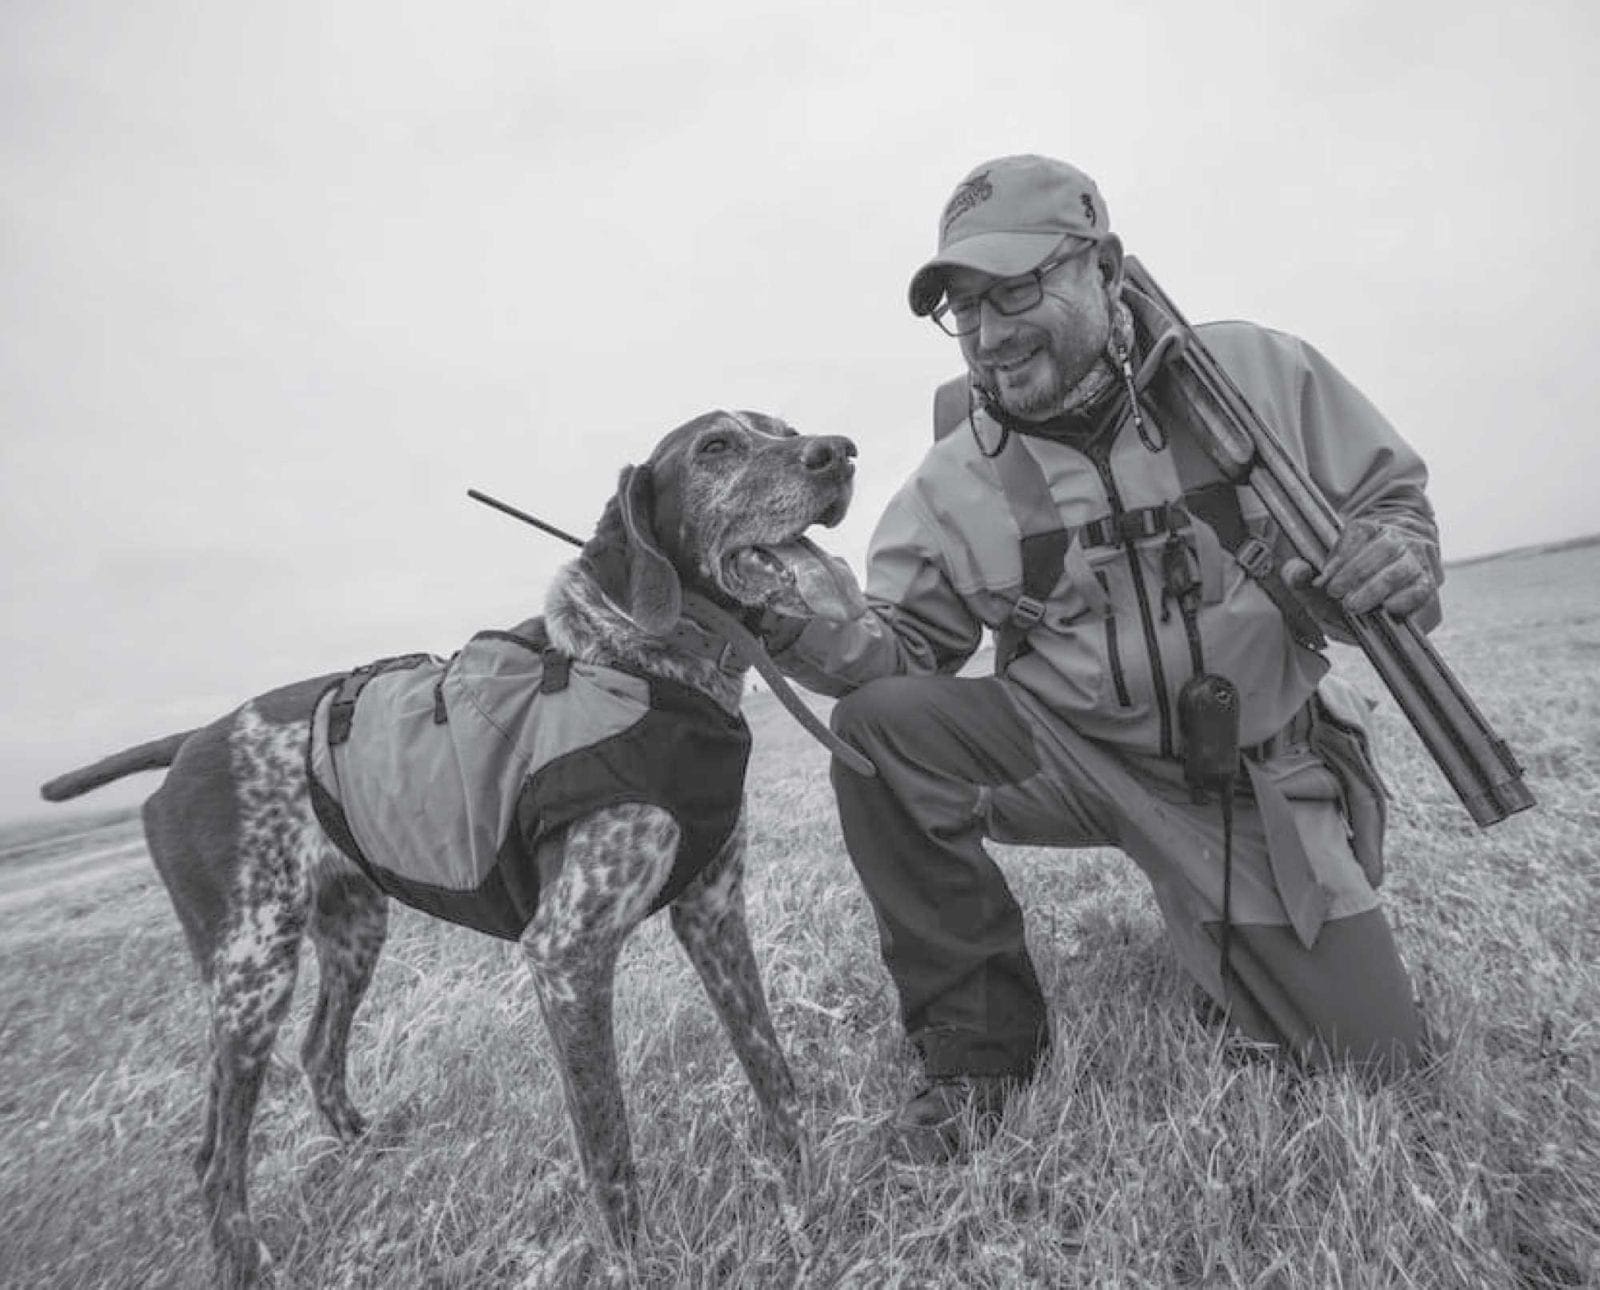 Pheasant hunter, Bob St Pierre with his German shorthaired pointer